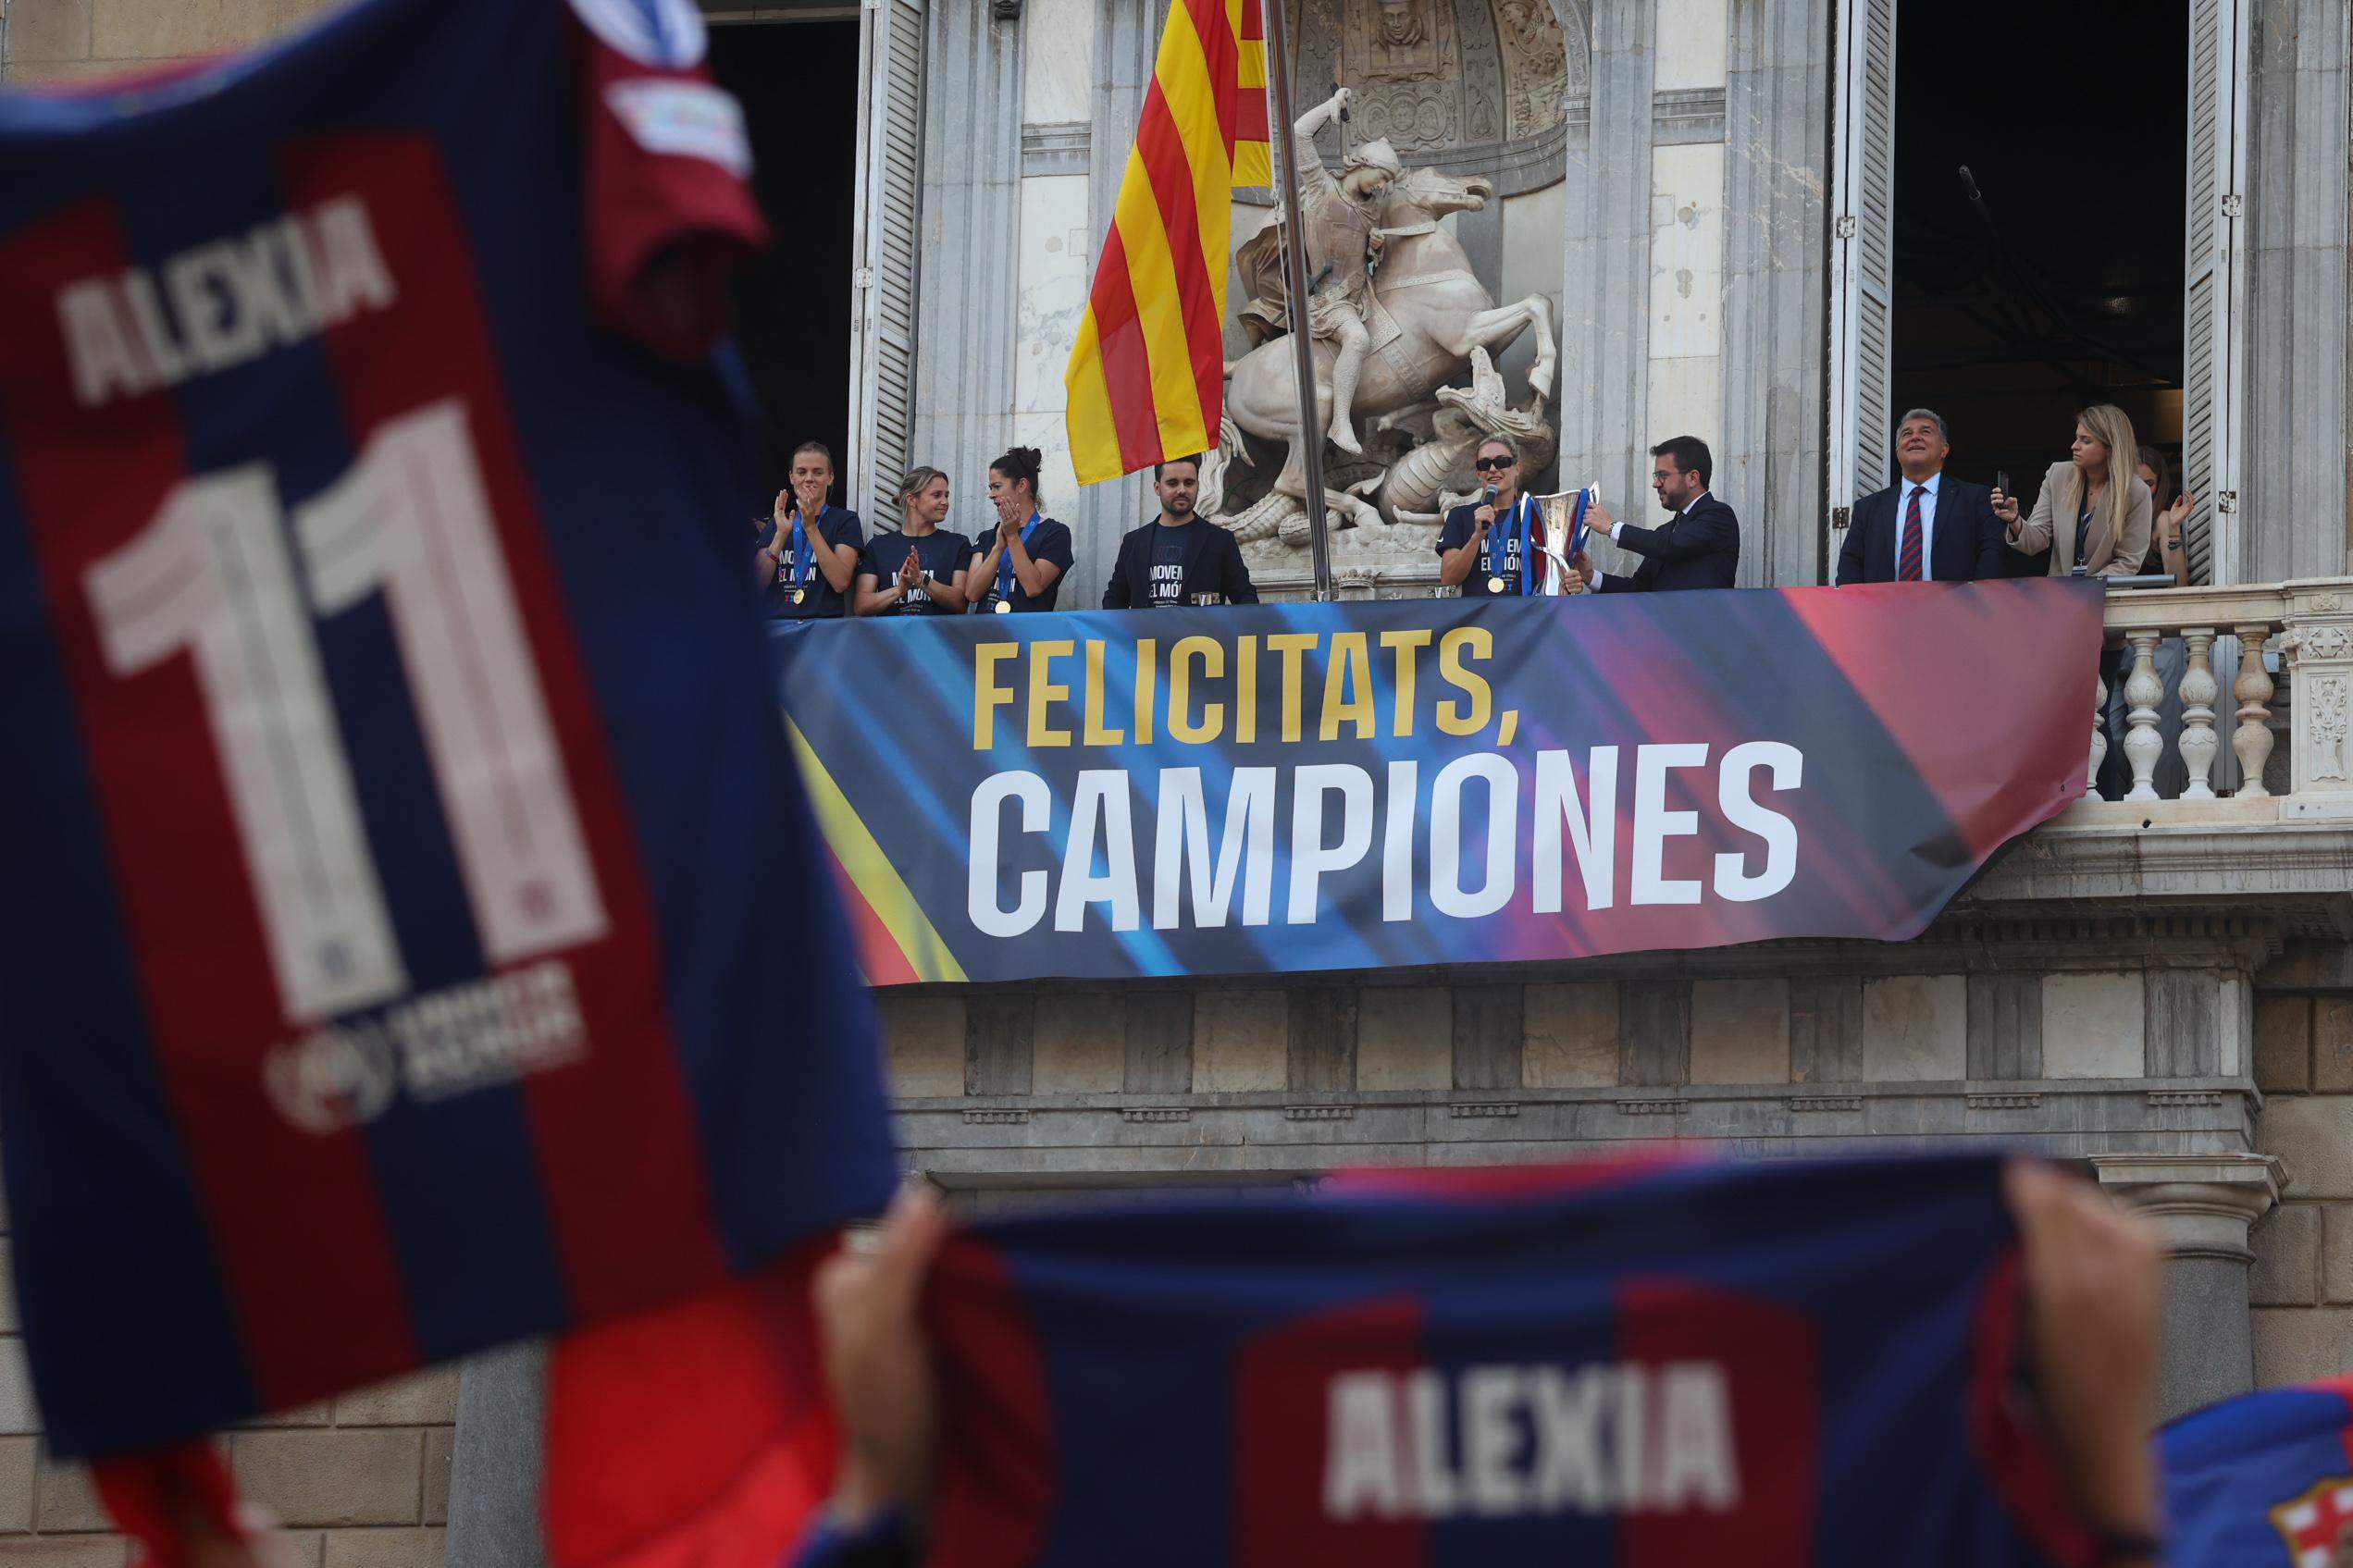 From Bilbao to Barcelona: Barça women players and fans celebrate their third Champions League